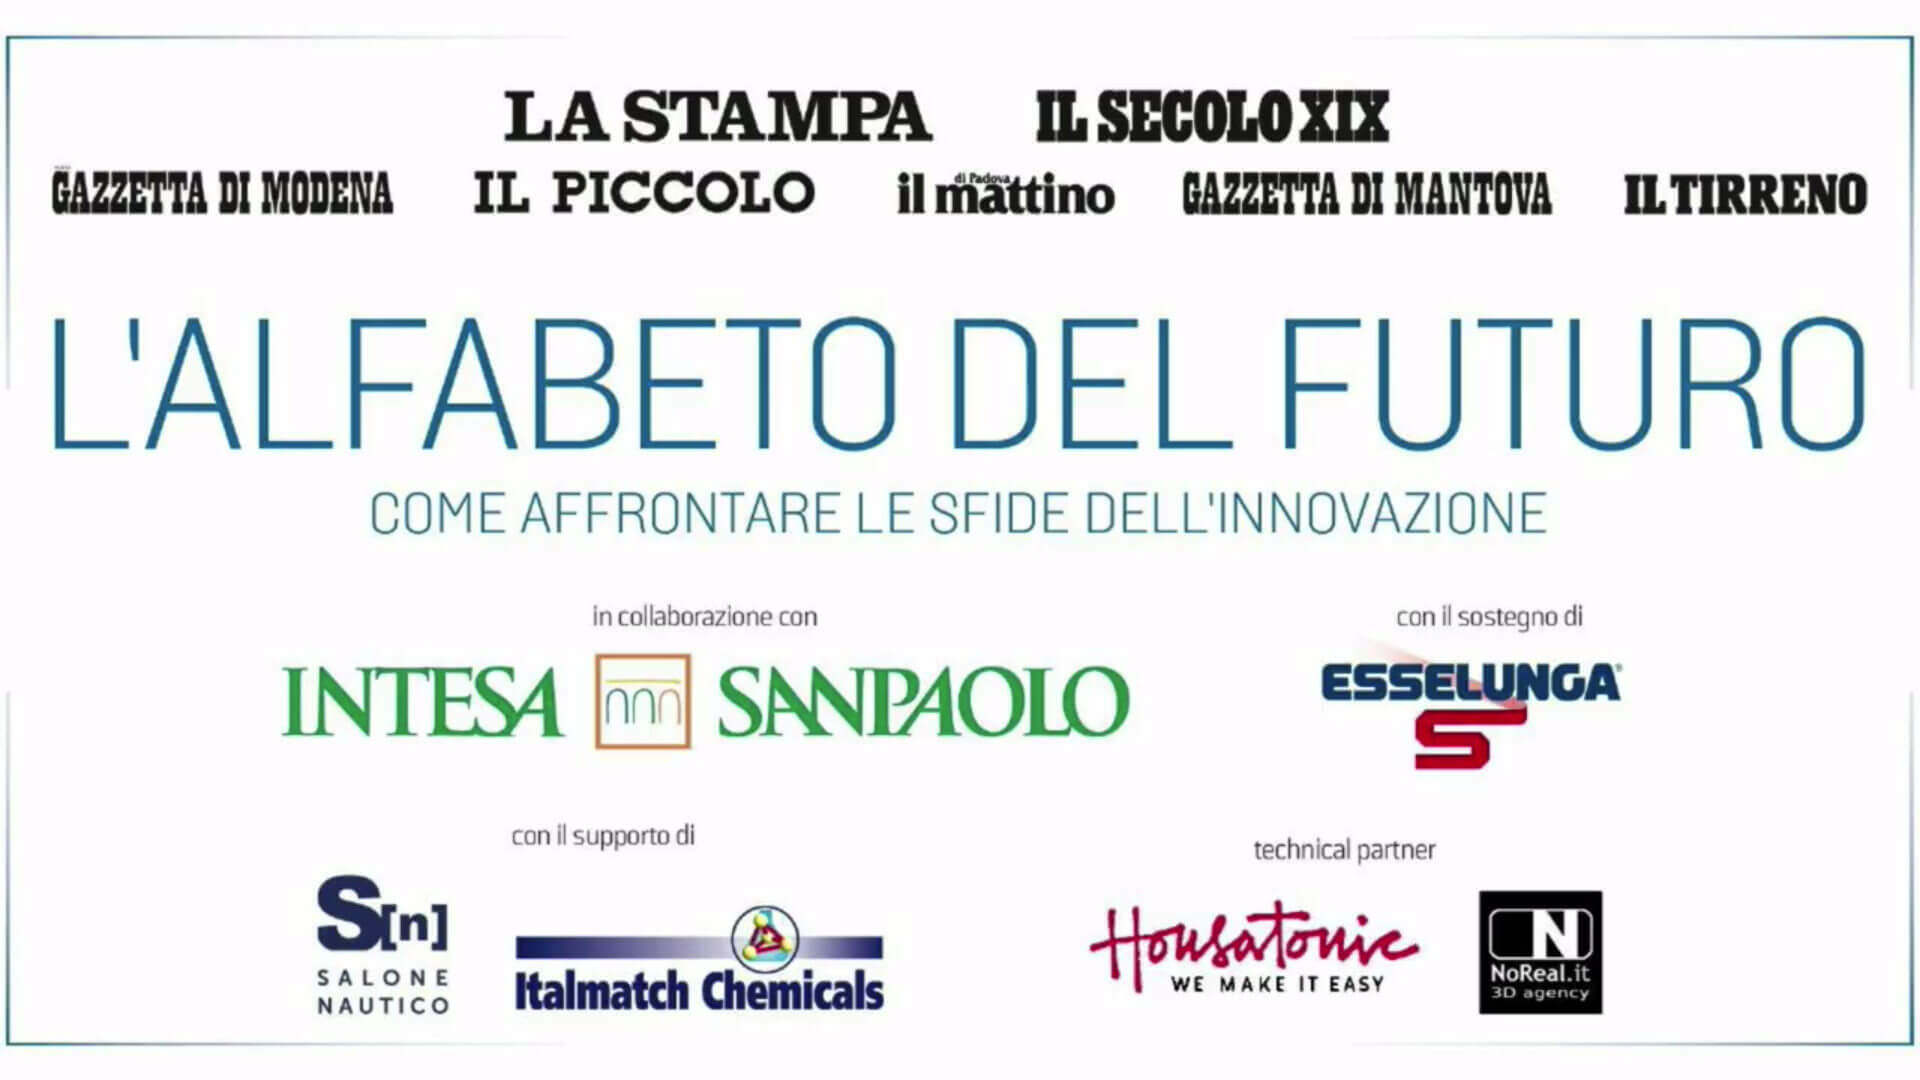 Italmatch Chemicals at Challenges for the future